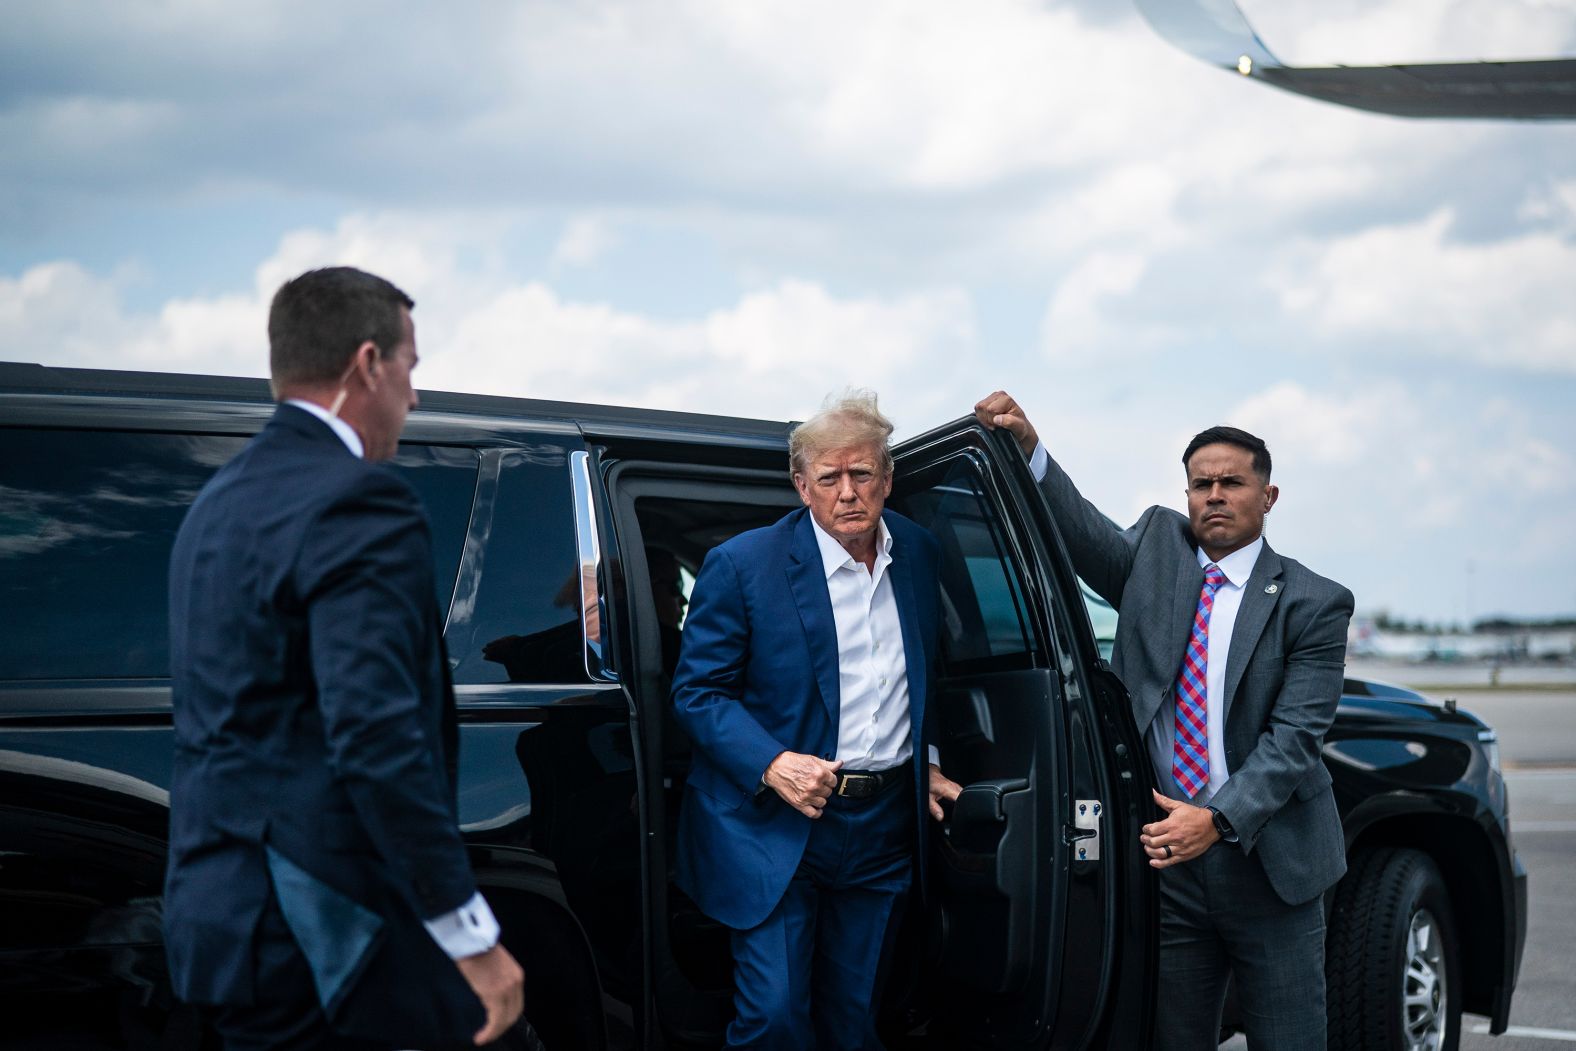 Trump boards his airplane before flying to Iowa to campaign on March 13, 2023.